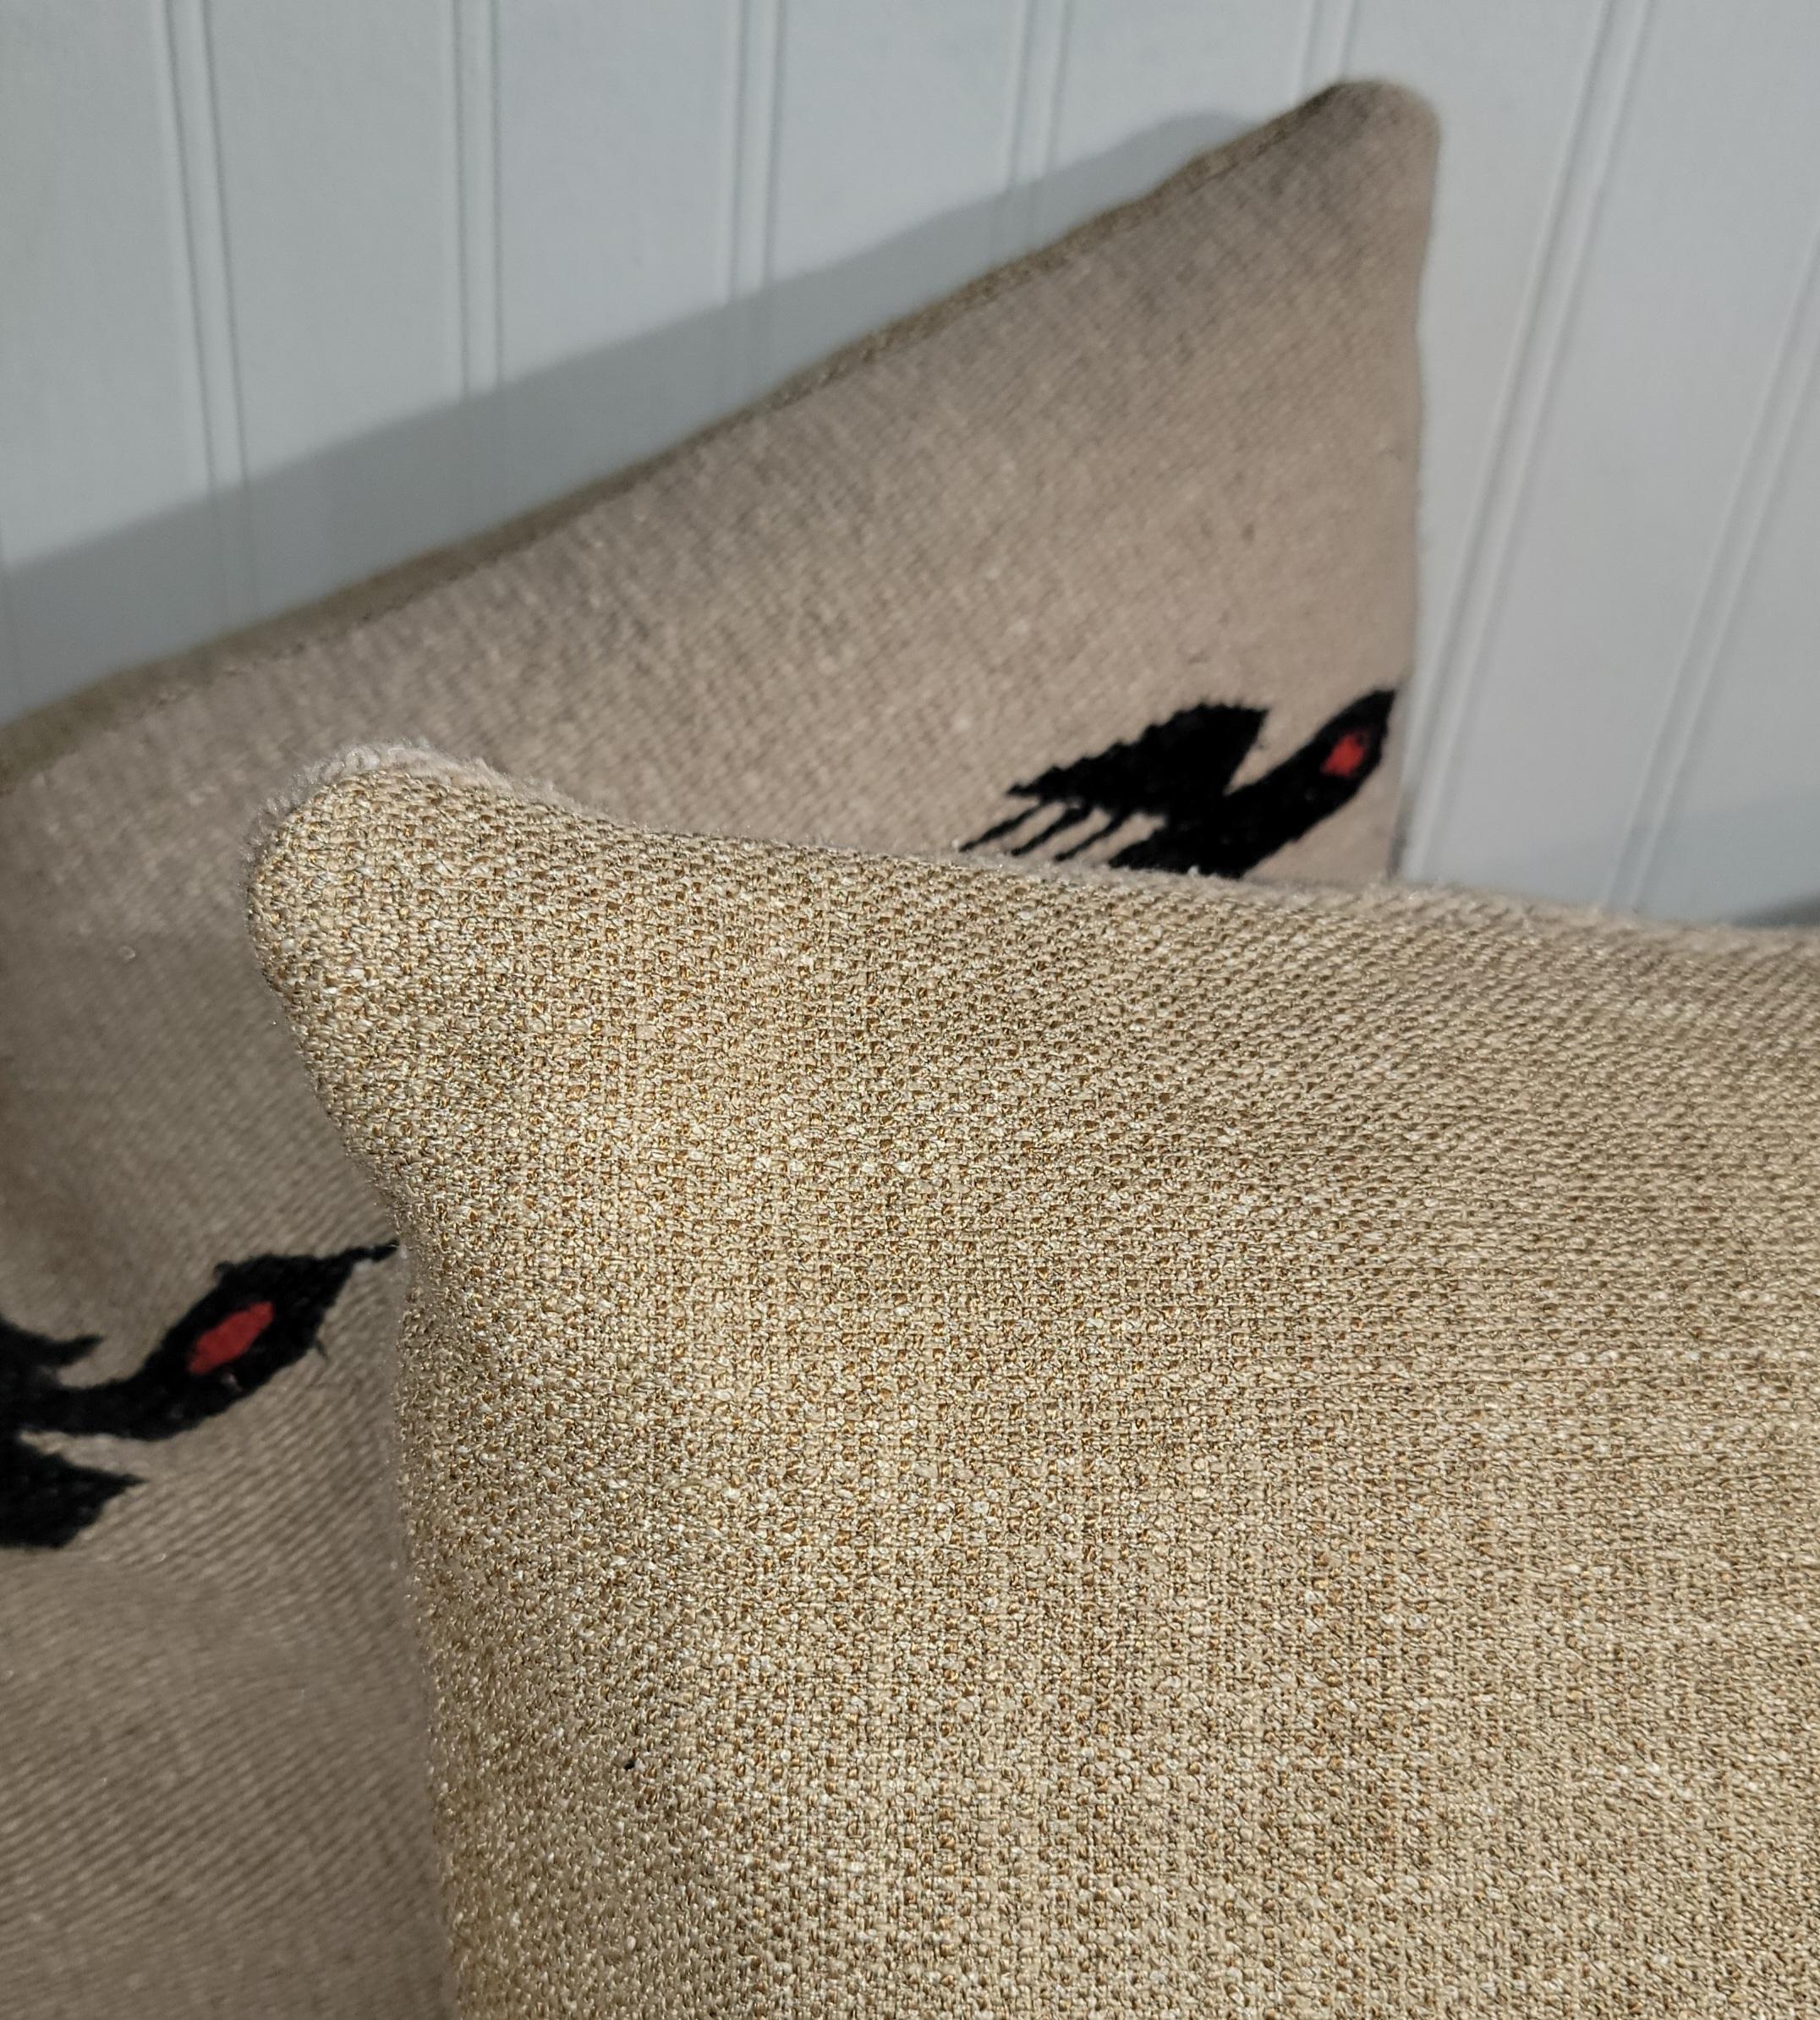 Beautiful beige/tan and black bird pillows sold in a set of three. These vintage bird pillows are made from wool fabrics and linen backings. The inserts are custom down and feather filled. This set of three are great for a sofa or large seat. Great